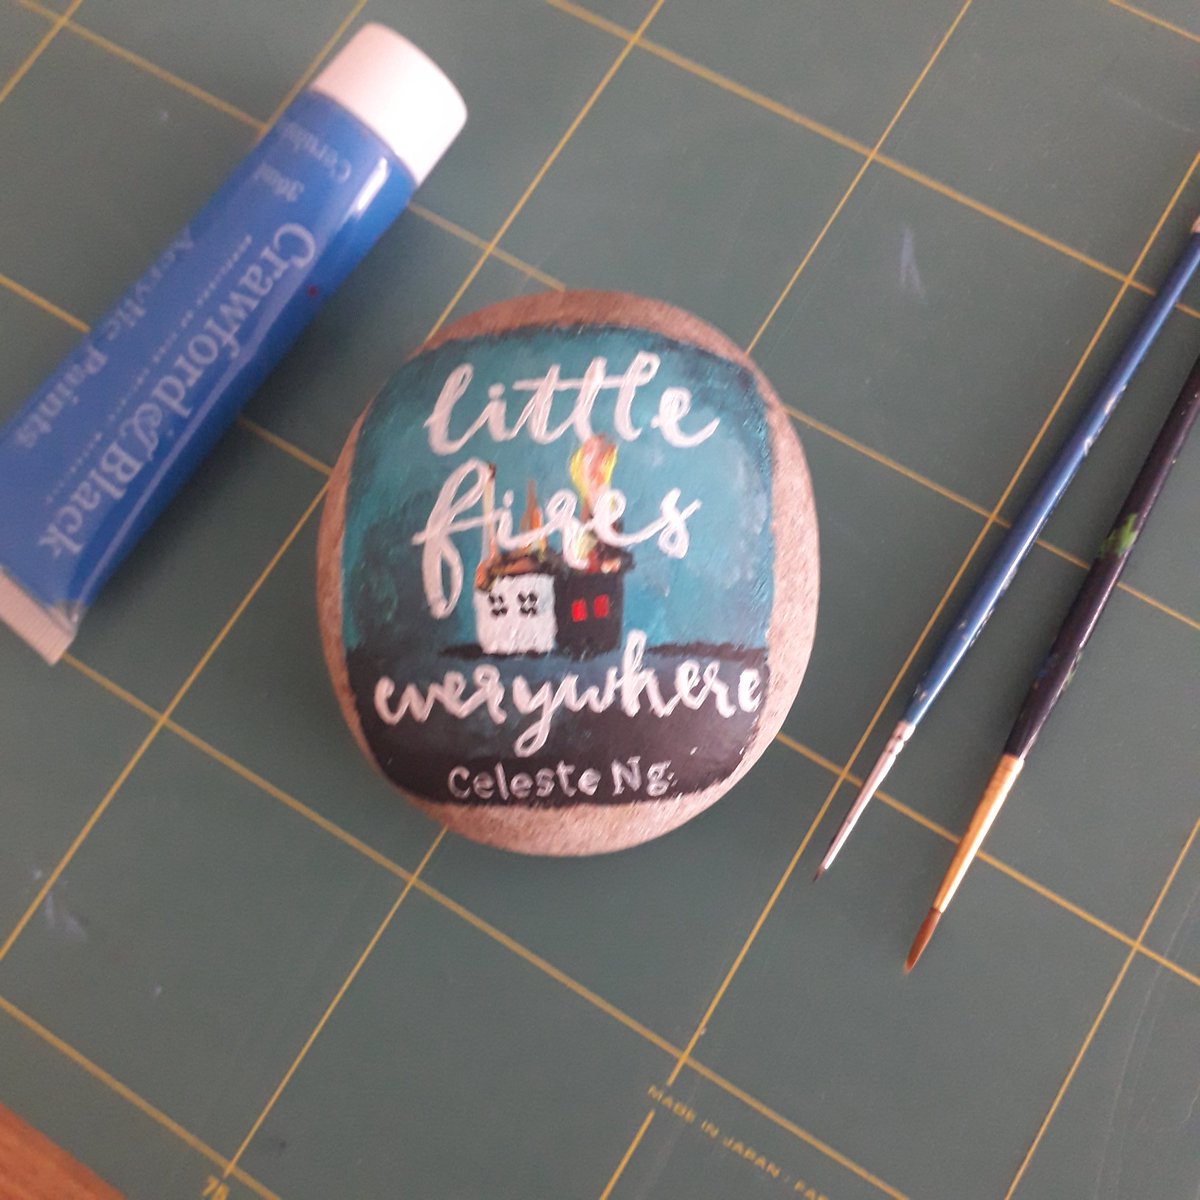 Little Fires Everywhere by Celeste Ng  @pronounced_ing painted on a rock  #LittleFiresEverywhere